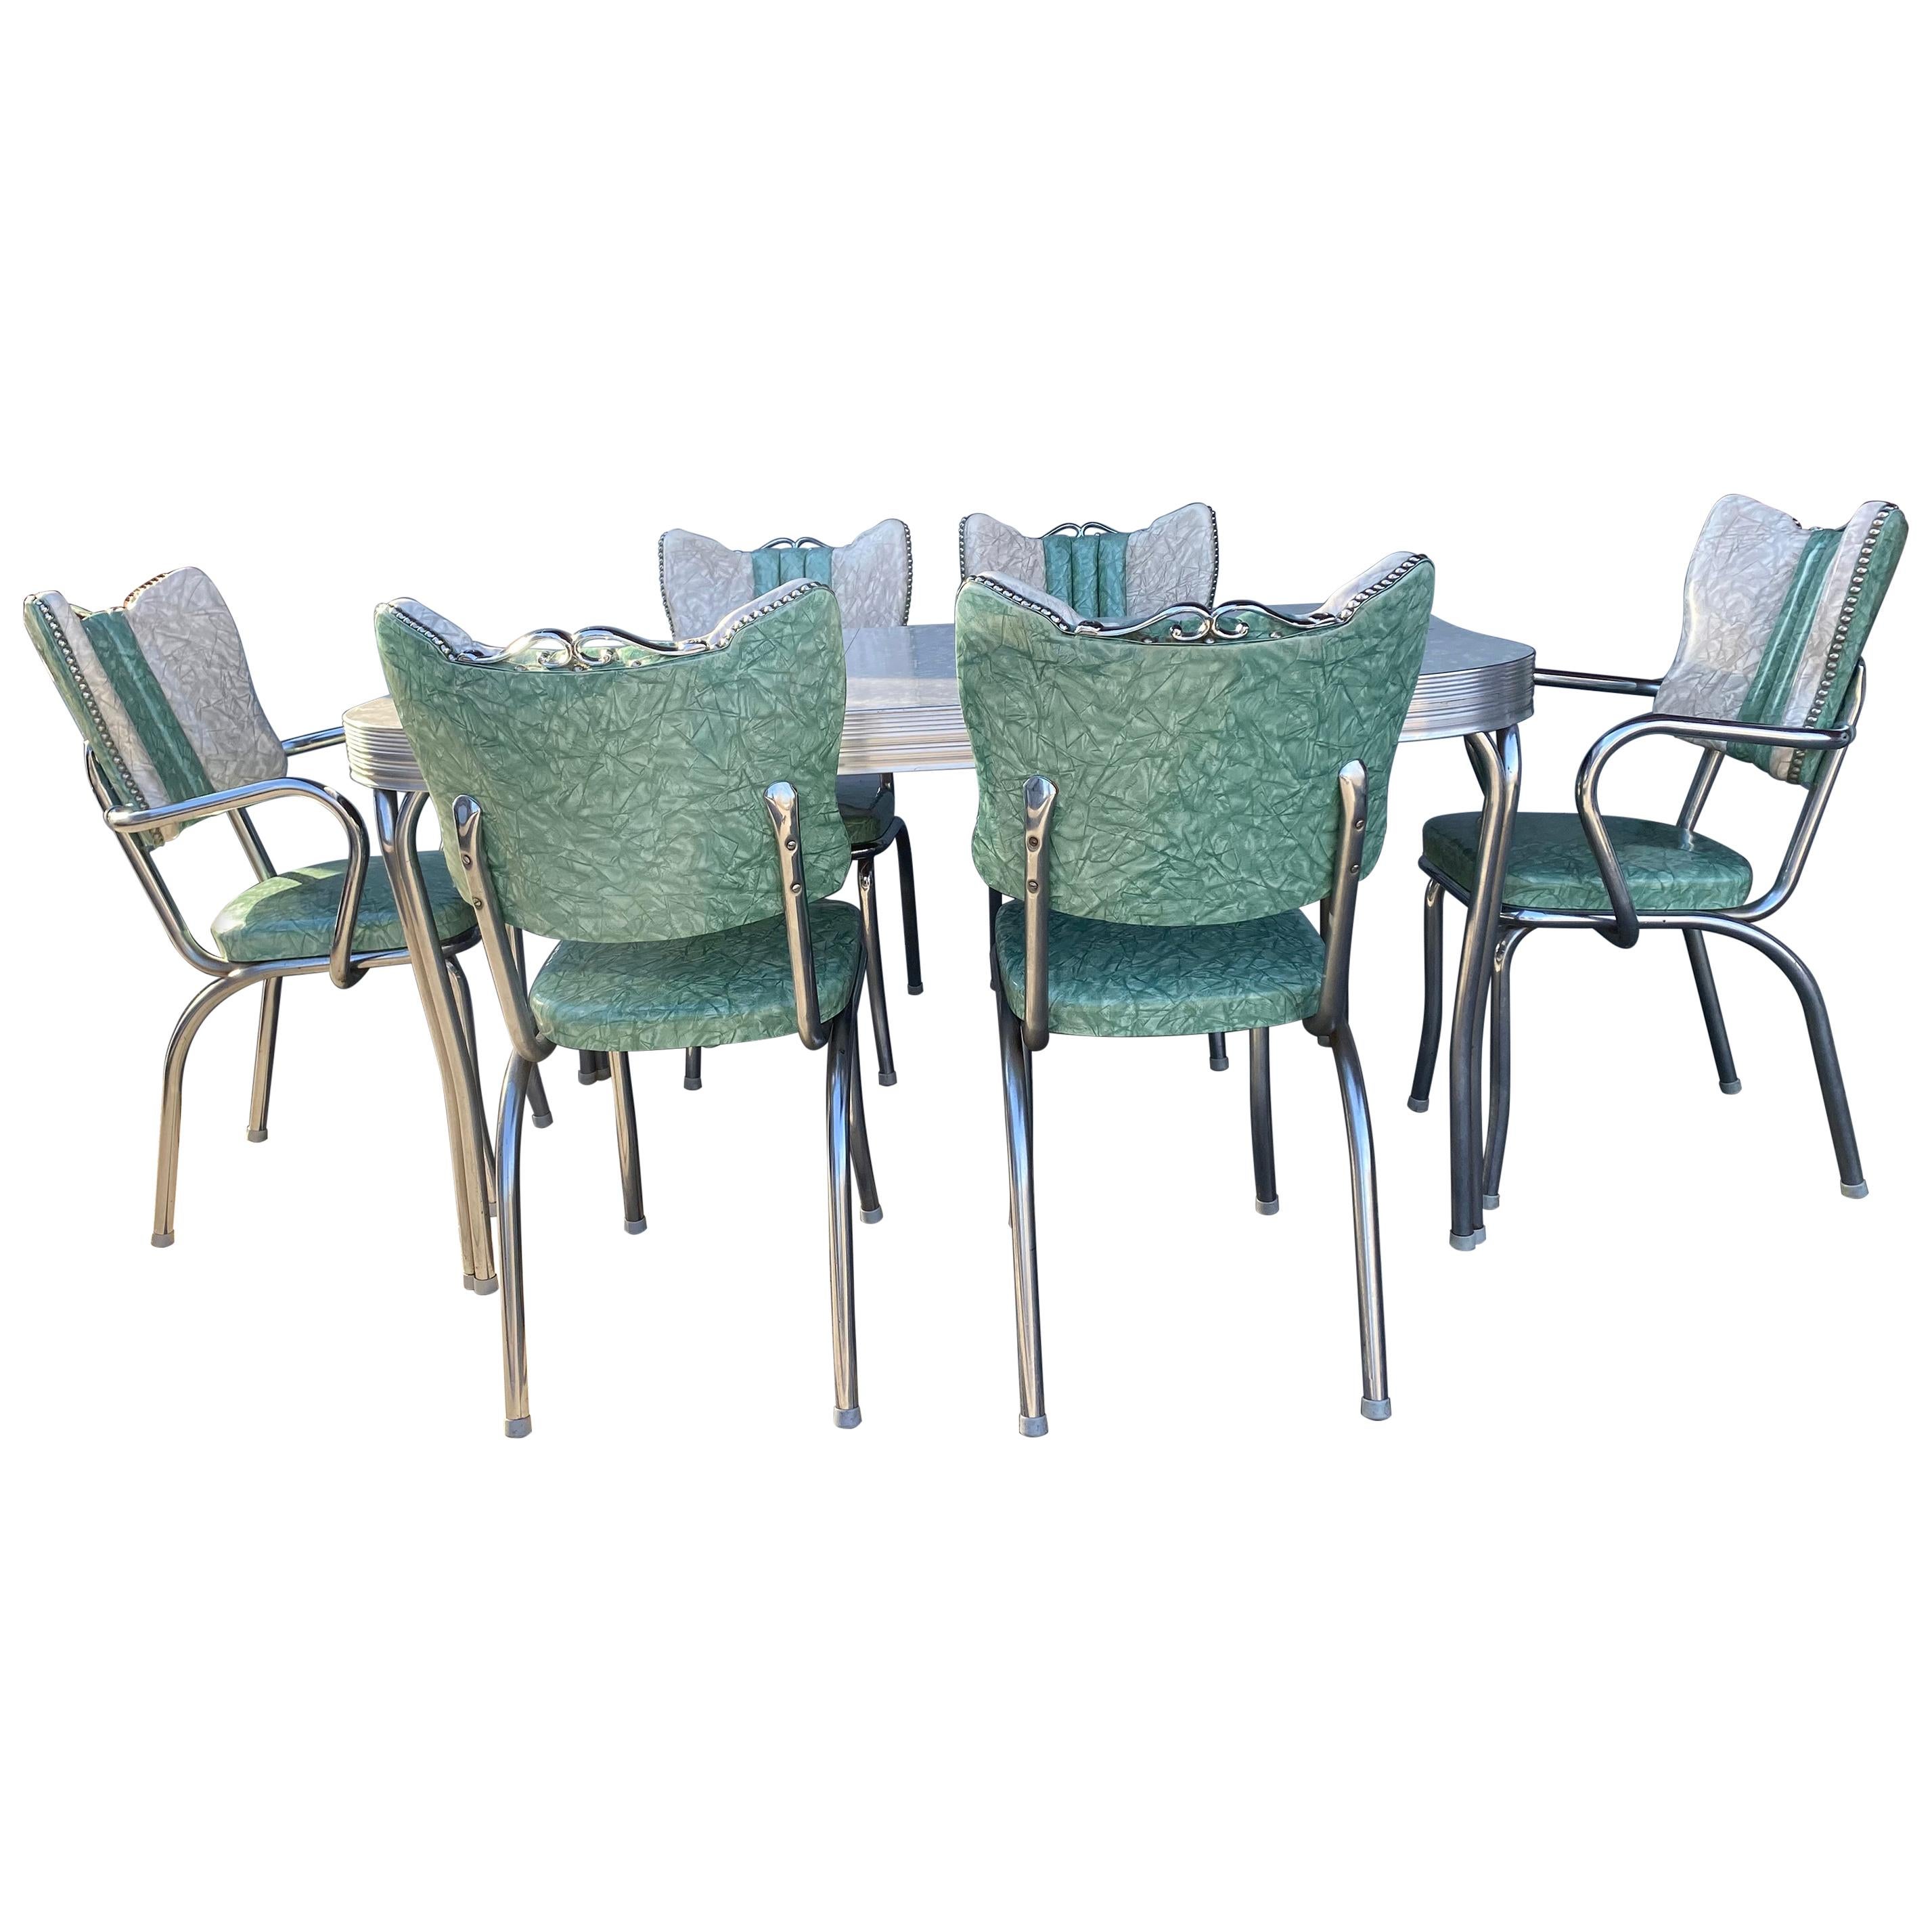 Classic Mid-Century Modern Chrome Dinette / Kitchen Set with 2 Captains Chairs